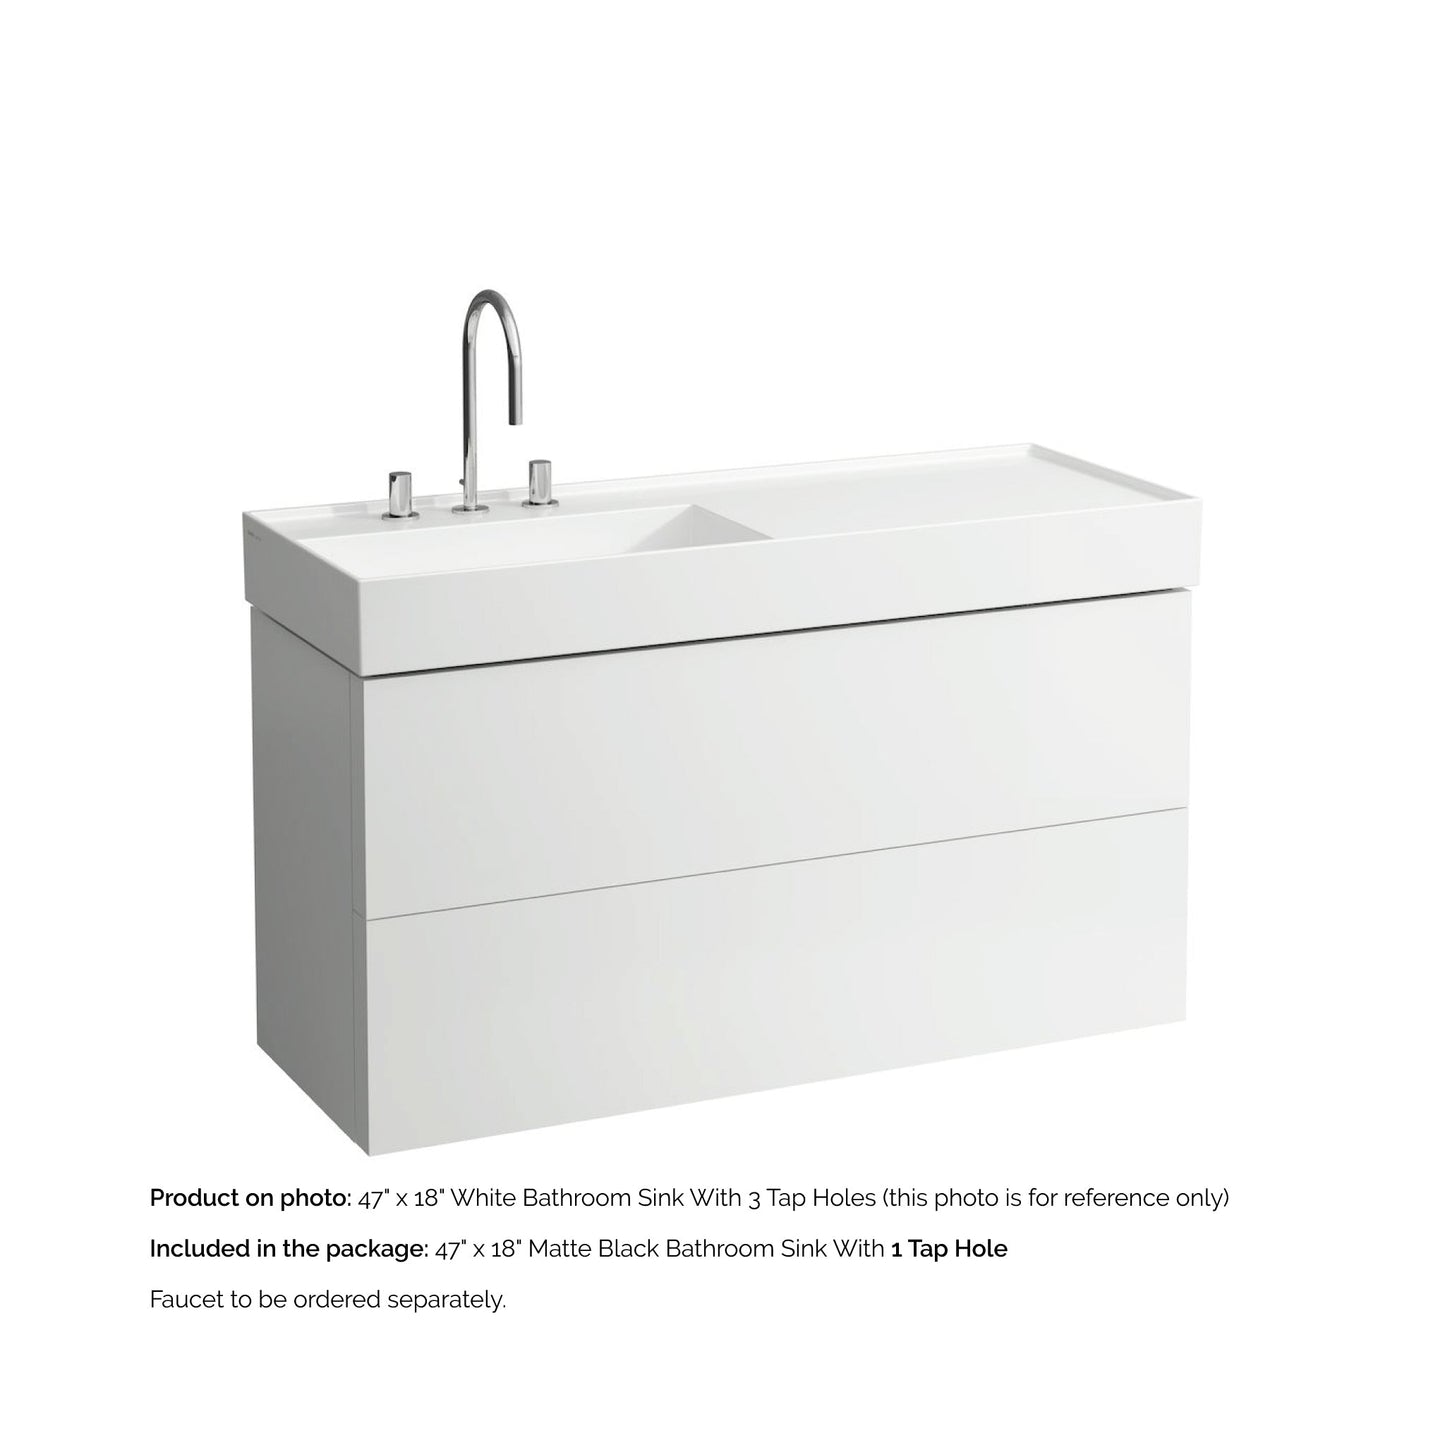 Laufen Kartell 47" x 18" Matte Black Wall-Mounted Shelf-Right Bathroom Sink With Faucet Hole